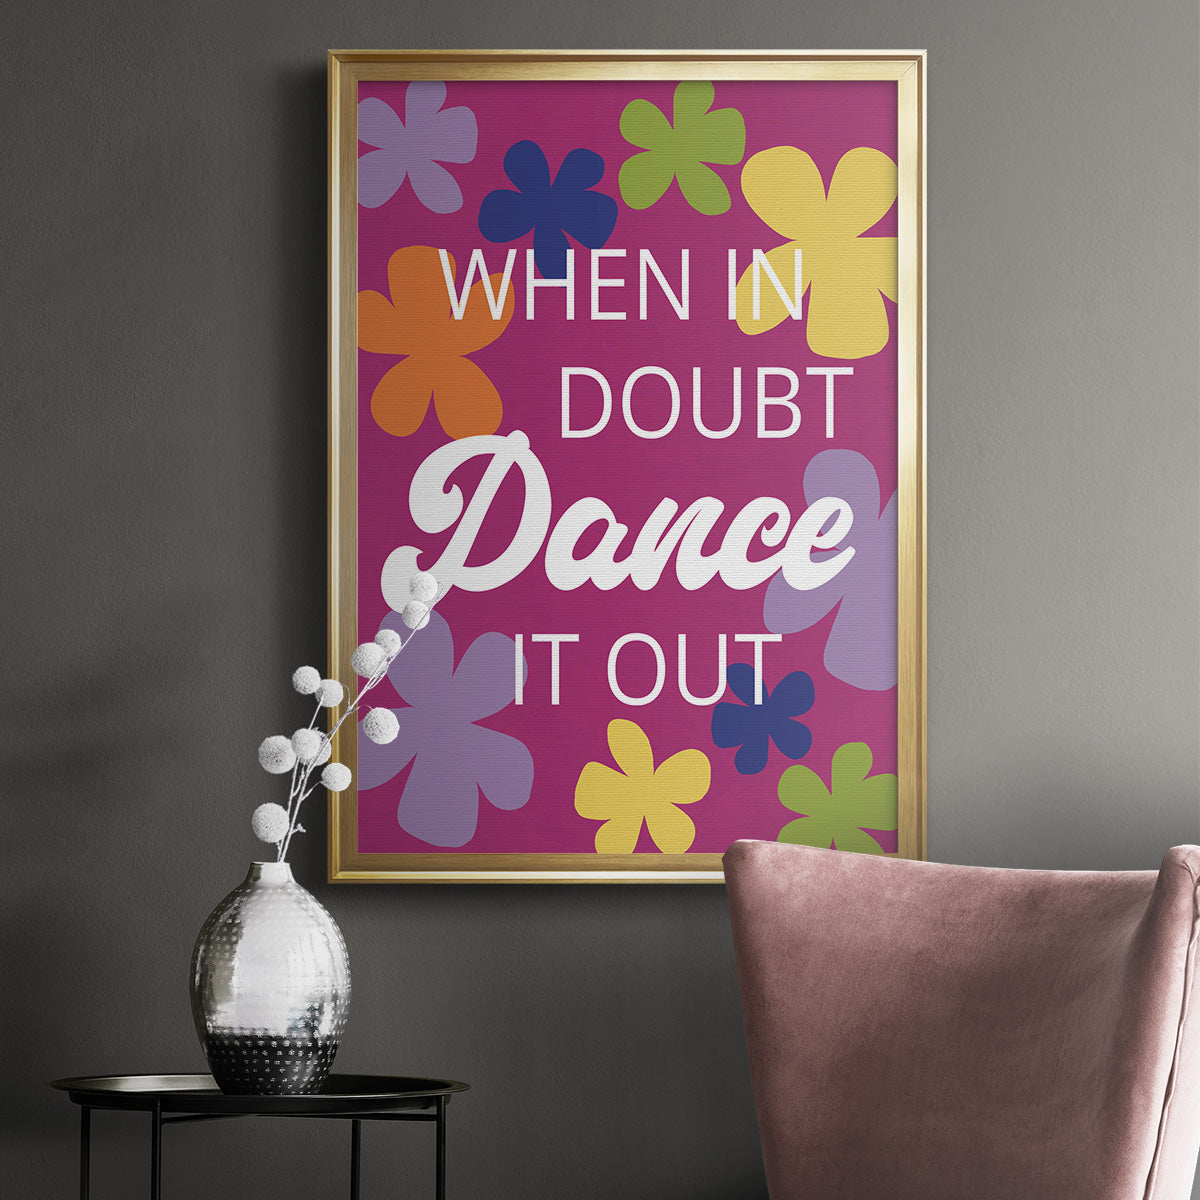 Dance It Out Premium Framed Print - Ready to Hang